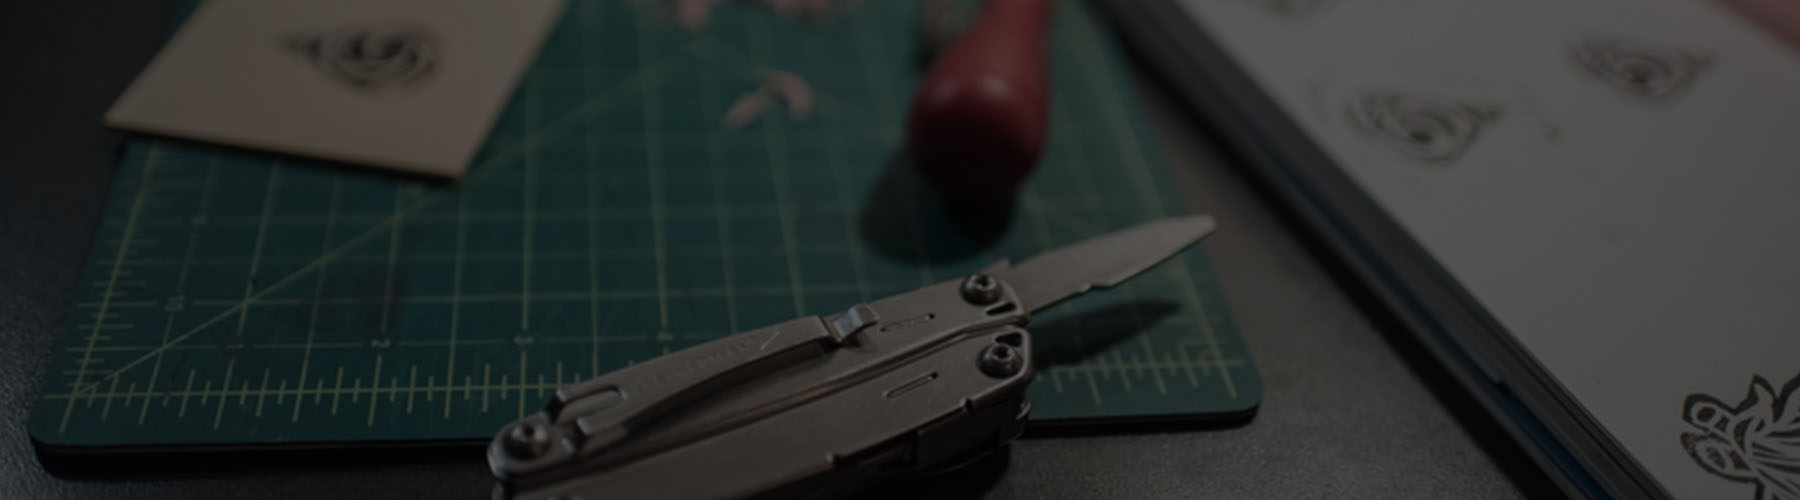 Leatherman tool with arts and crafts